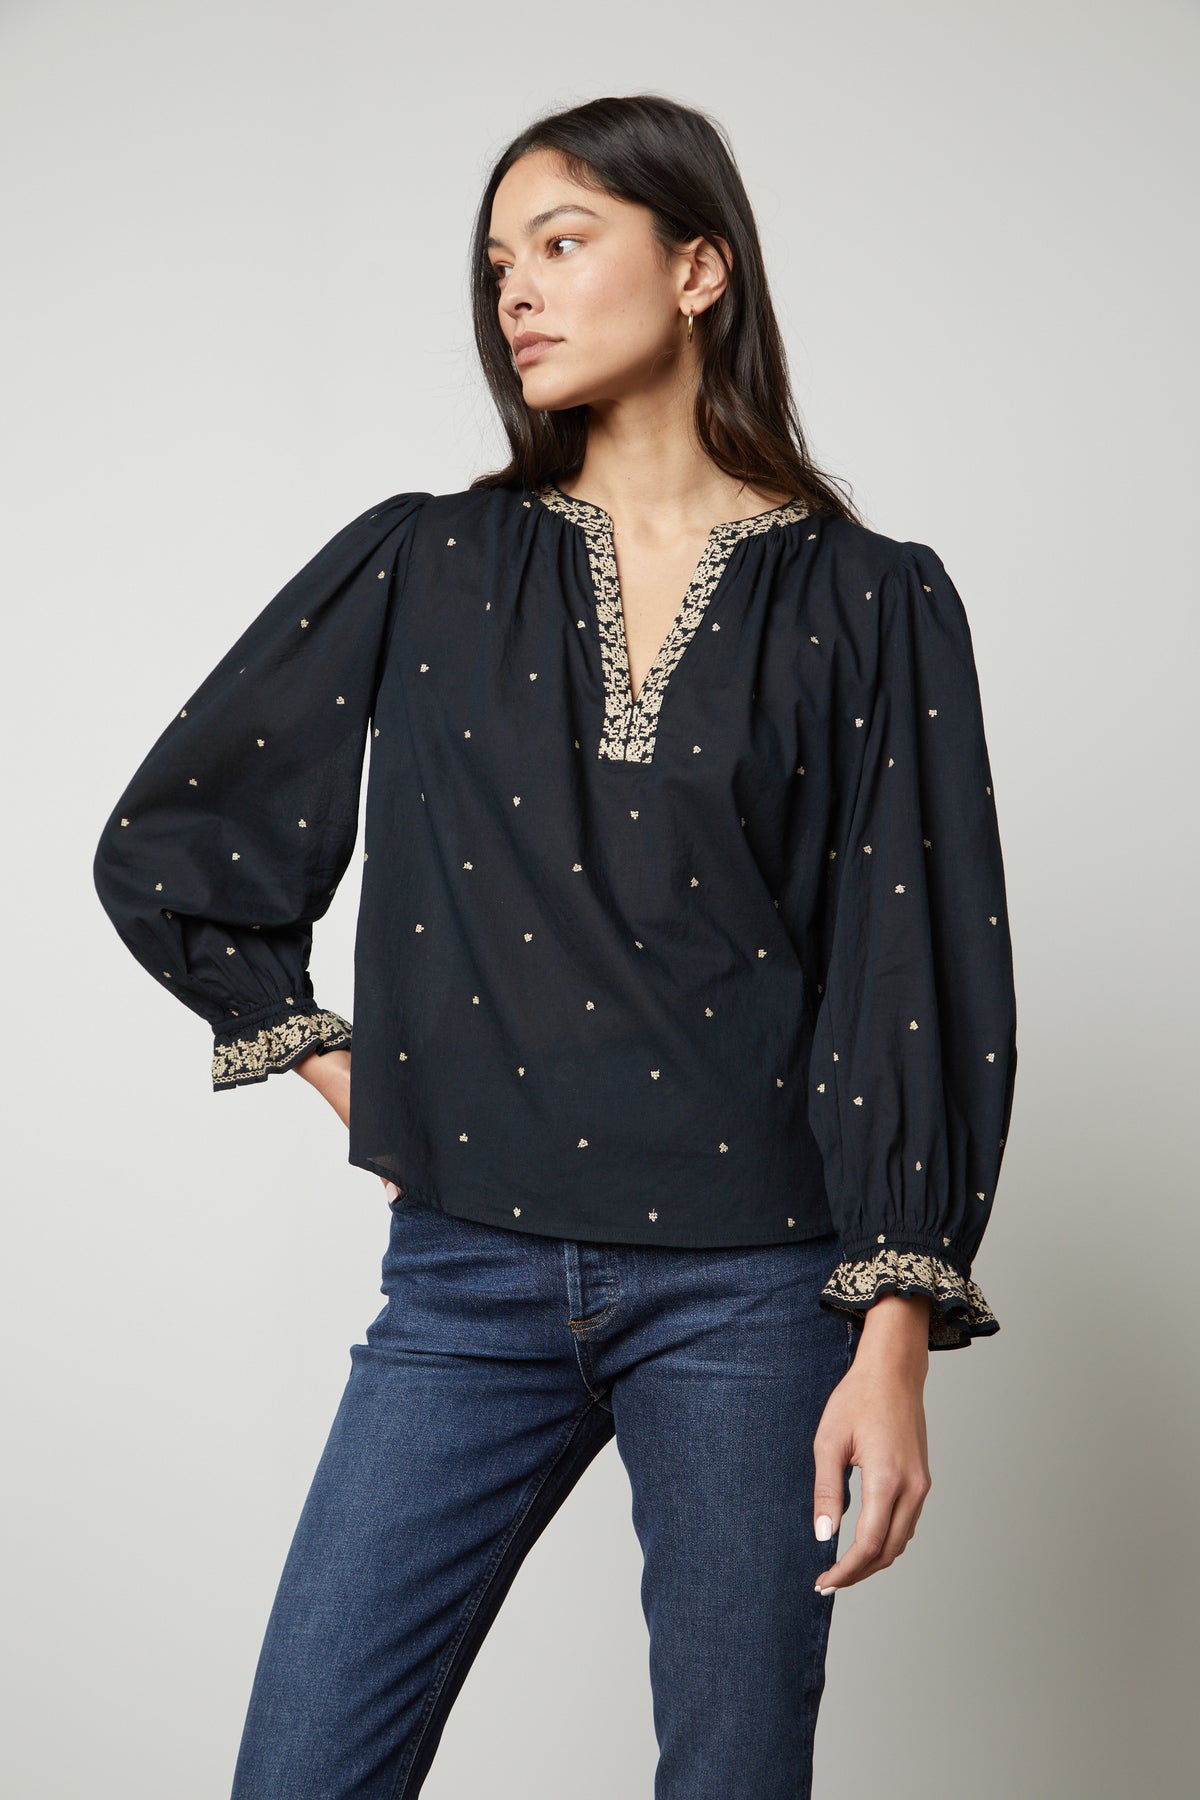   The model is wearing Velvet by Graham & Spencer ANIA EMBROIDERED BOHO TOP and jeans. 